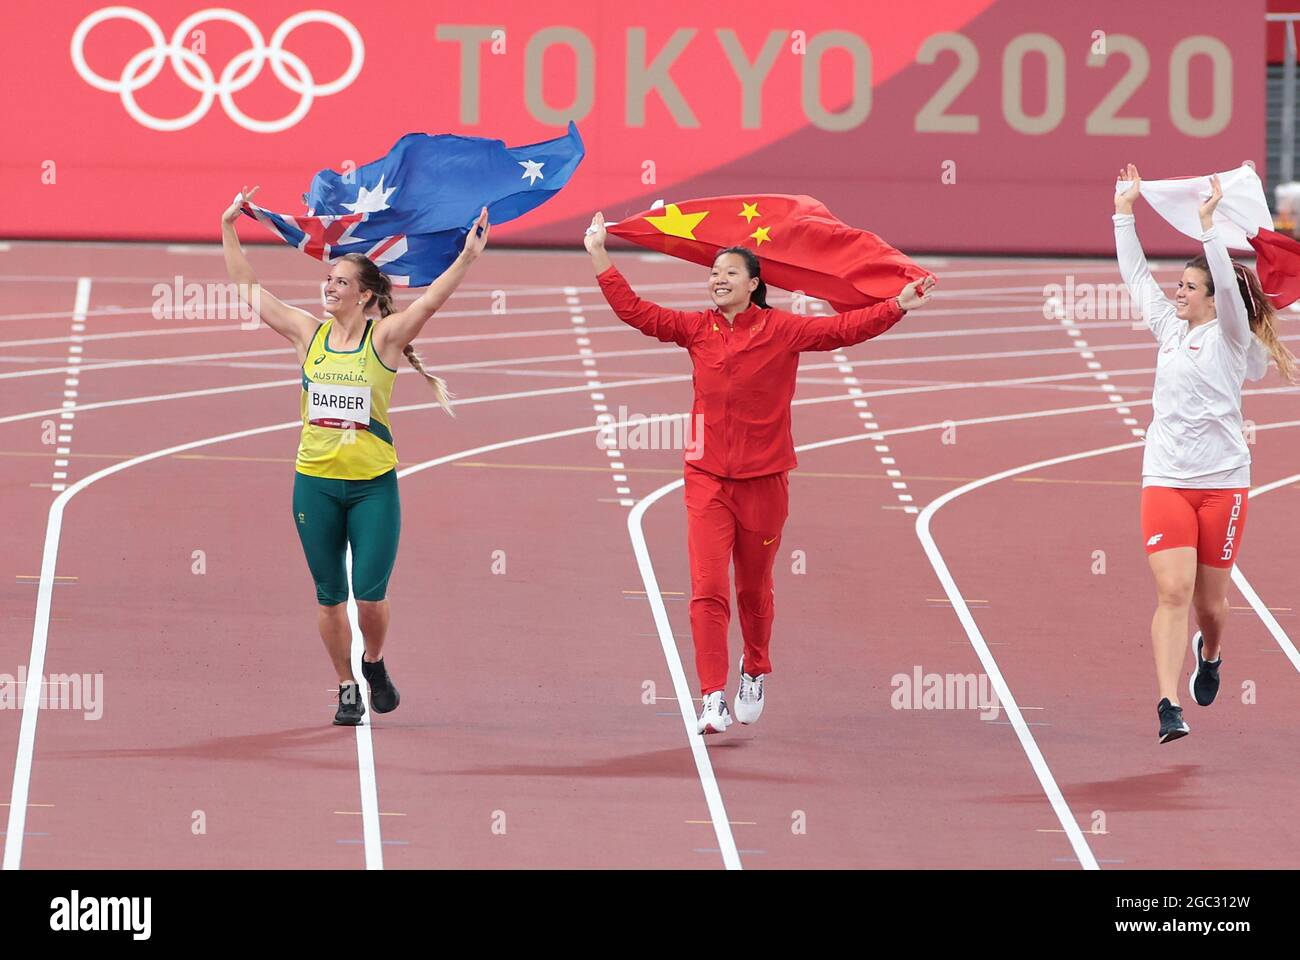 Tokyo, Japan. 6th Aug, 2021. (From L to R) Kelsey-Lee Barber of Australia, Liu Shiying of China and Maria Andrejczyk of Poland celebrate after the women's javelin throw final at Tokyo 2020 Olympic Games, in Tokyo, Japan, Aug. 6, 2021. Credit: Li Gang/Xinhua/Alamy Live News Stock Photo